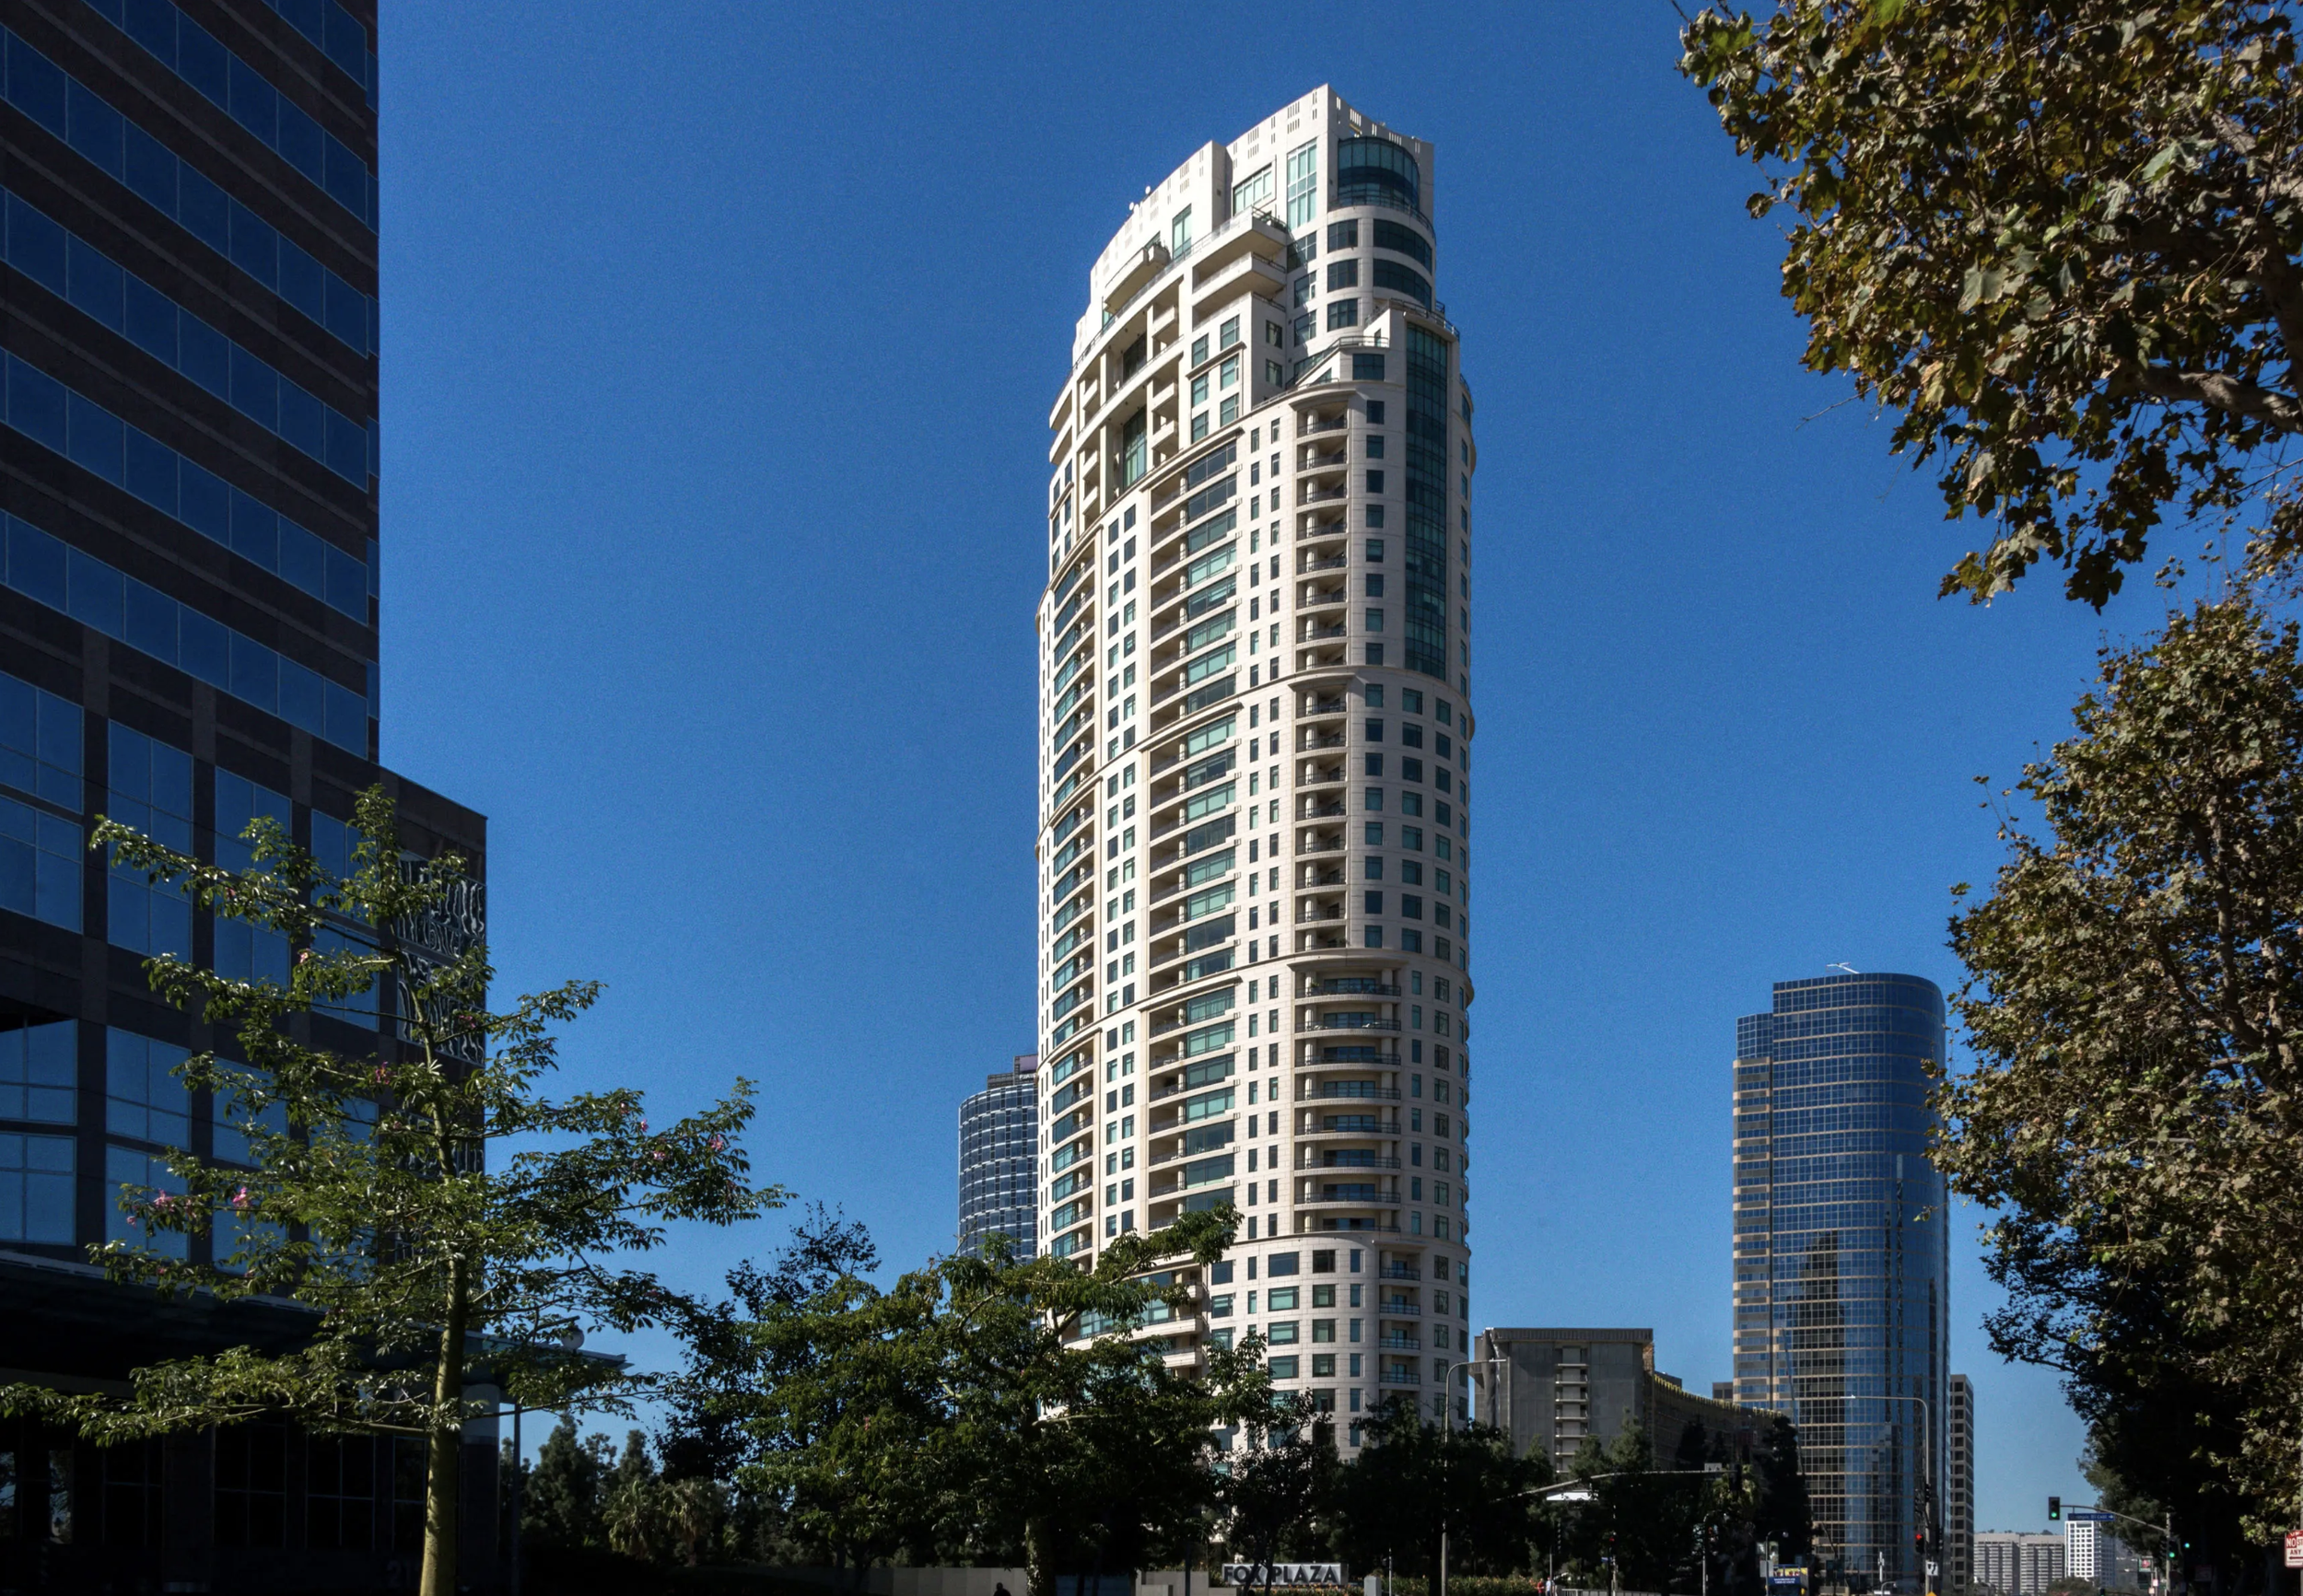 The penthouse is located in The Century building.